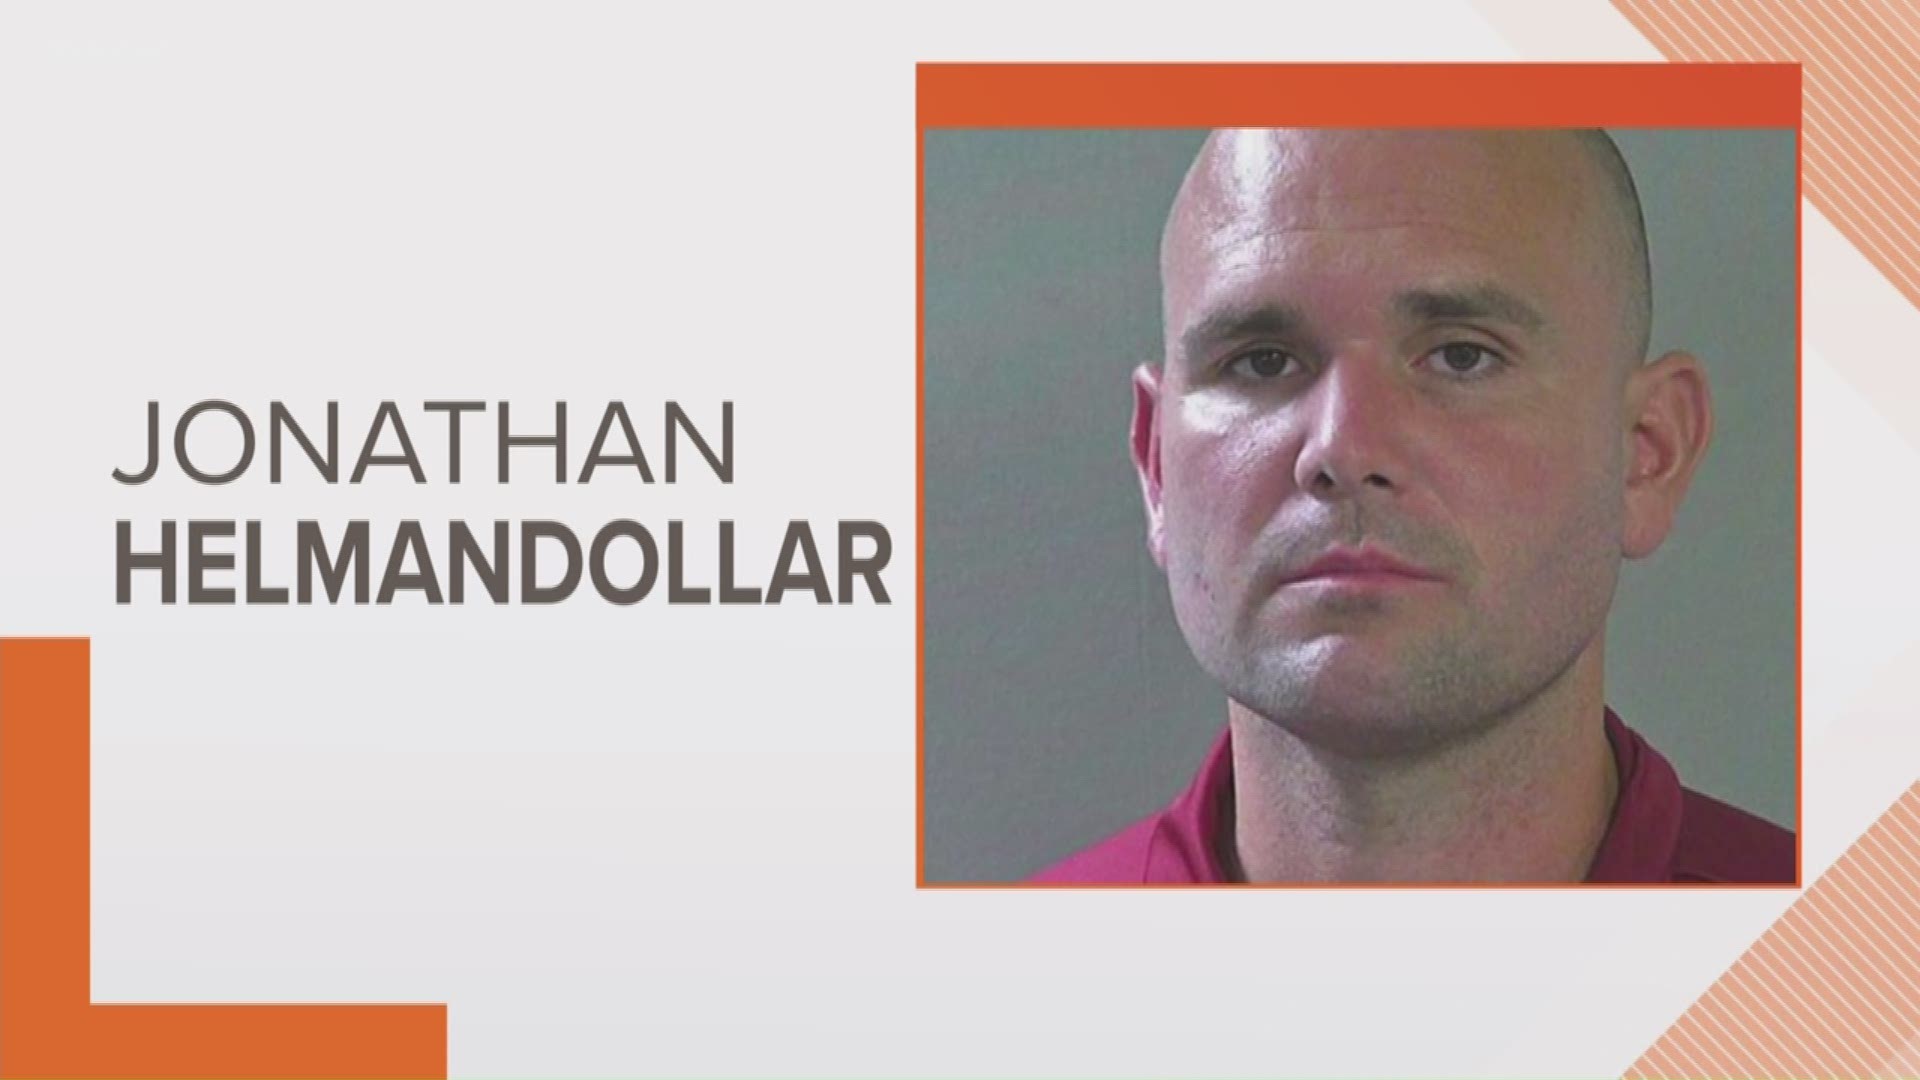 Jonathan Helmandollar is also accused of lying to police during an AMBER Alert involving his daughter.